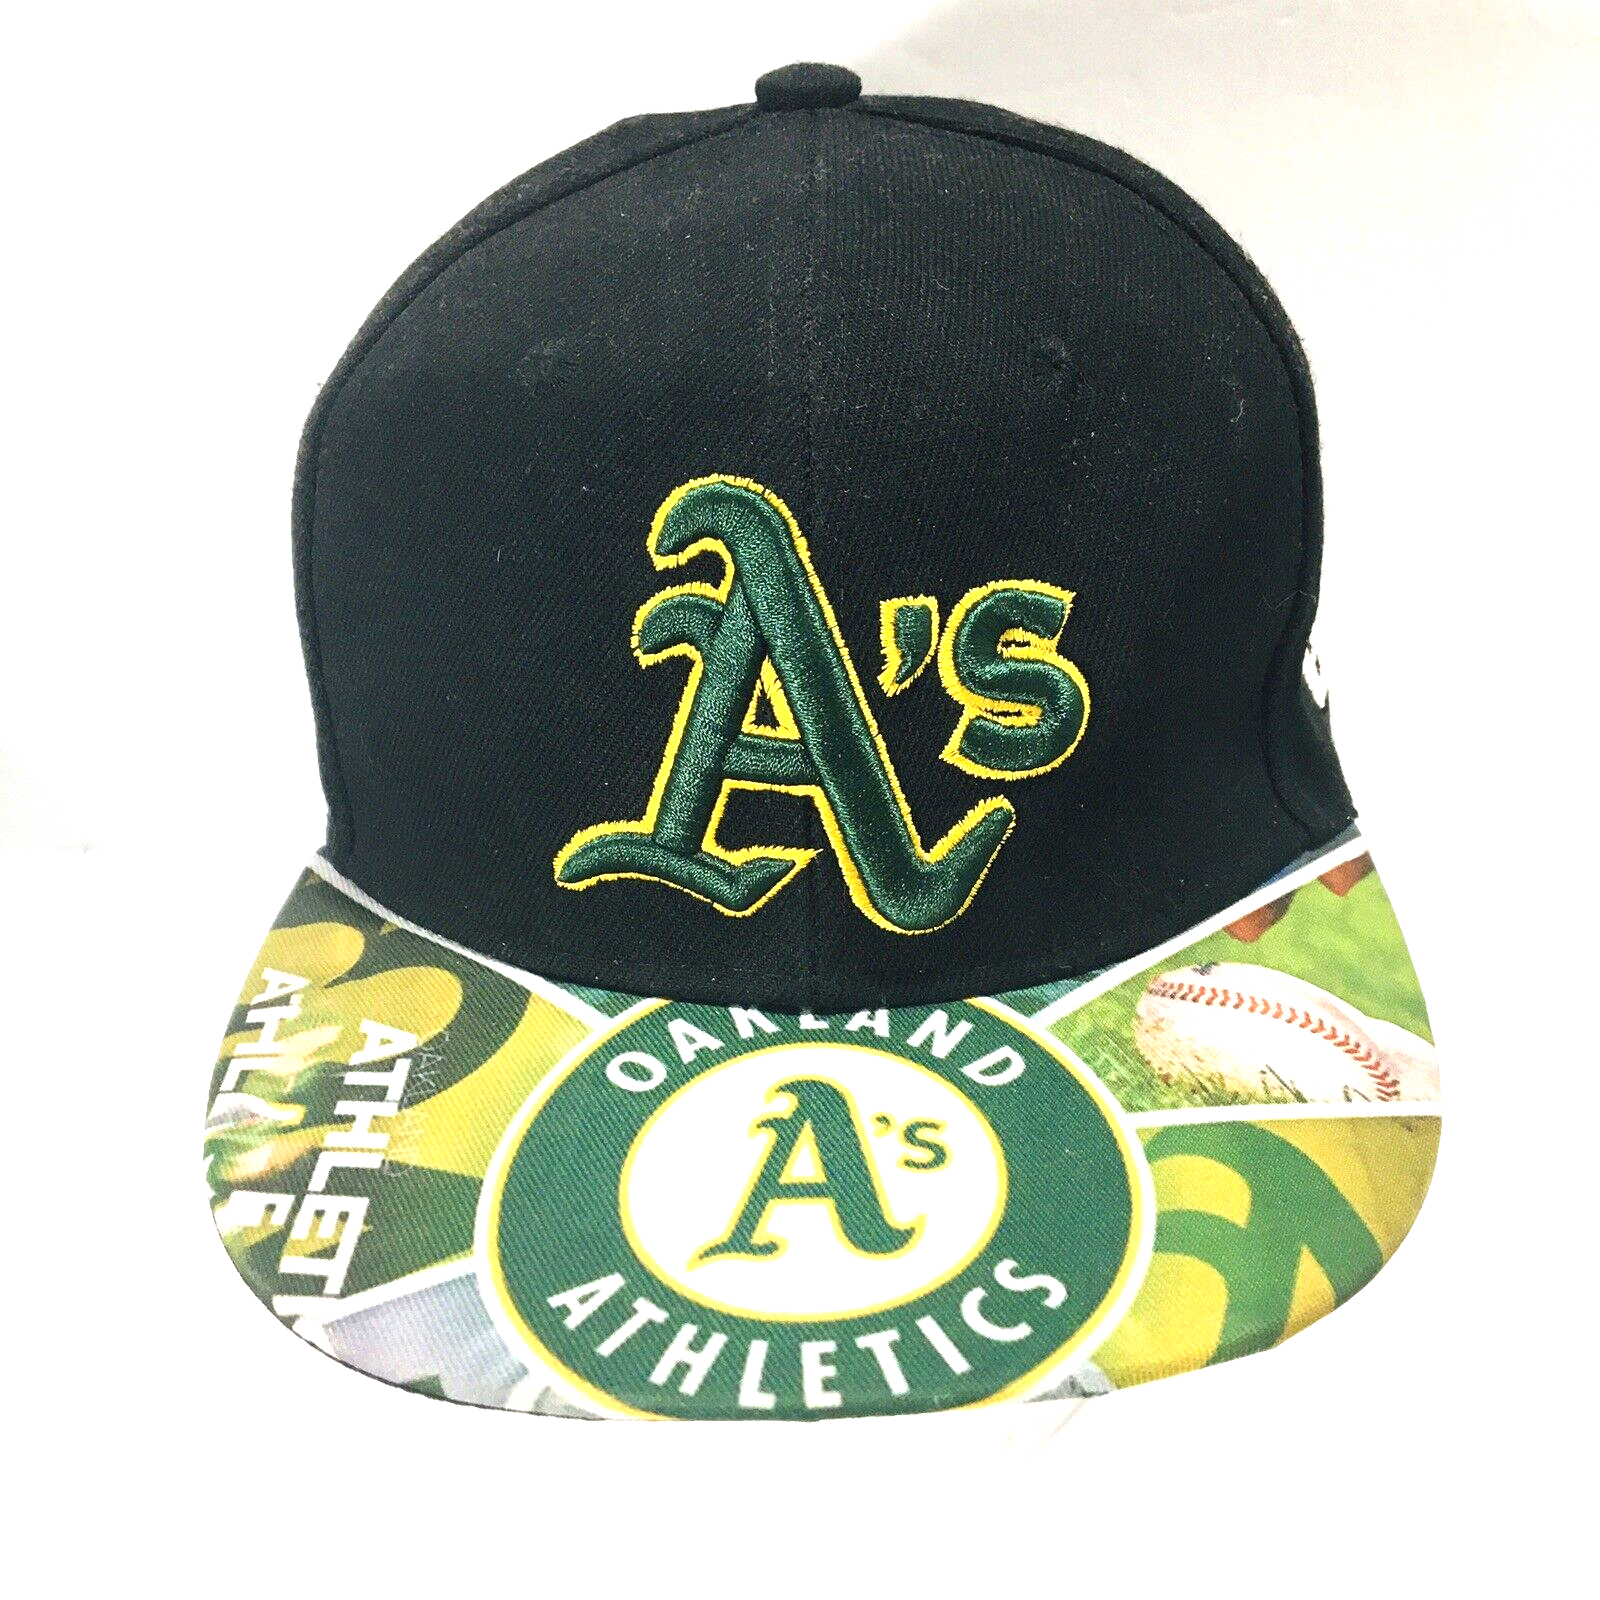 Primary image for Oakland A's Embroidered Genuine Merchandise MLB New Era Hat Cap Pre-Owned